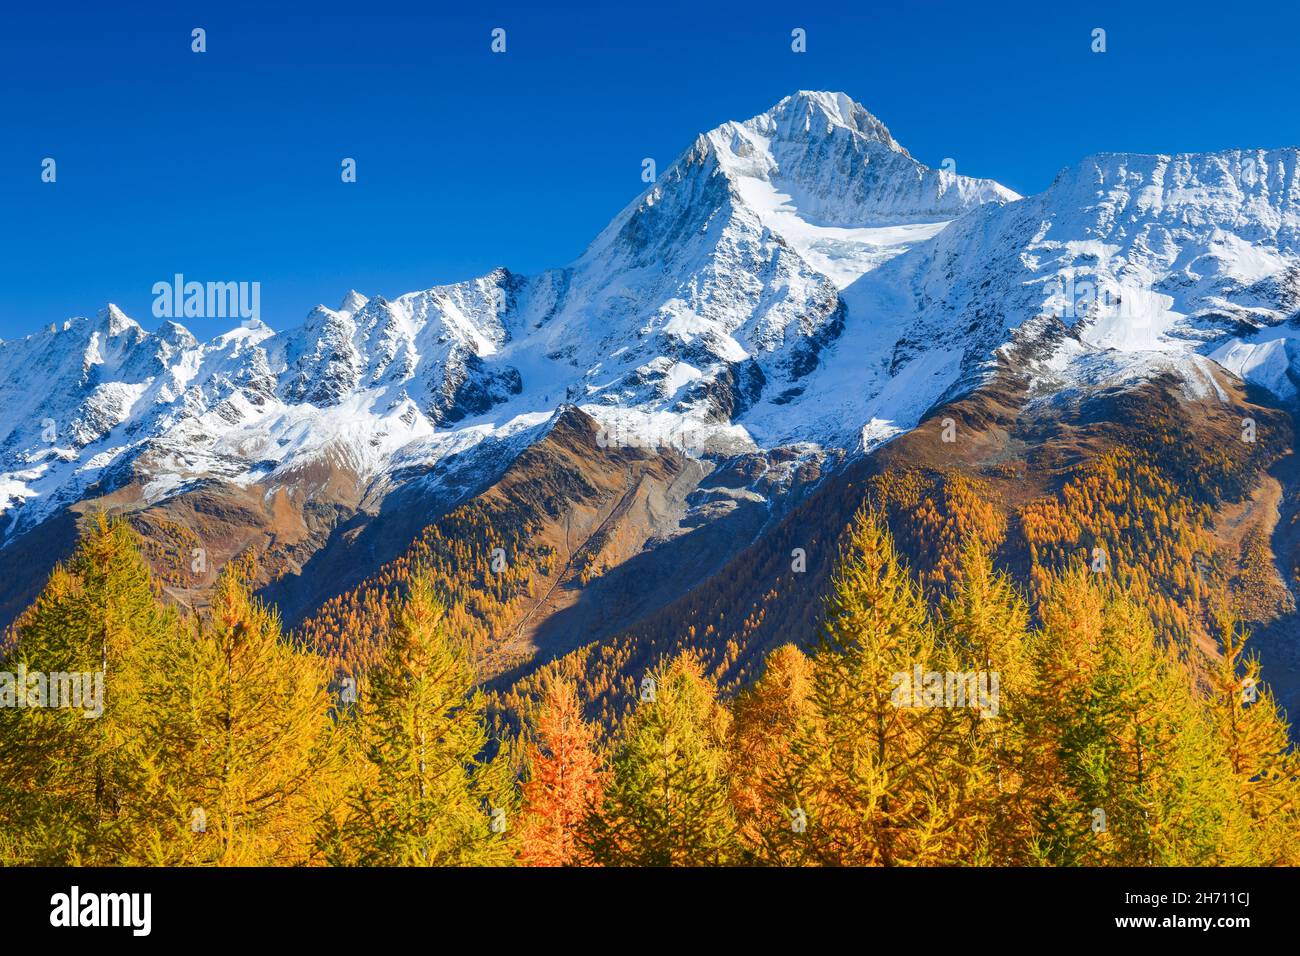 The freshly snow-covered Bietschhorn (3934) in front of golden-yellow larches and under a steel-blue sky in the autumnal Loetschental, Canton of Valais, Switzerland Stock Photo